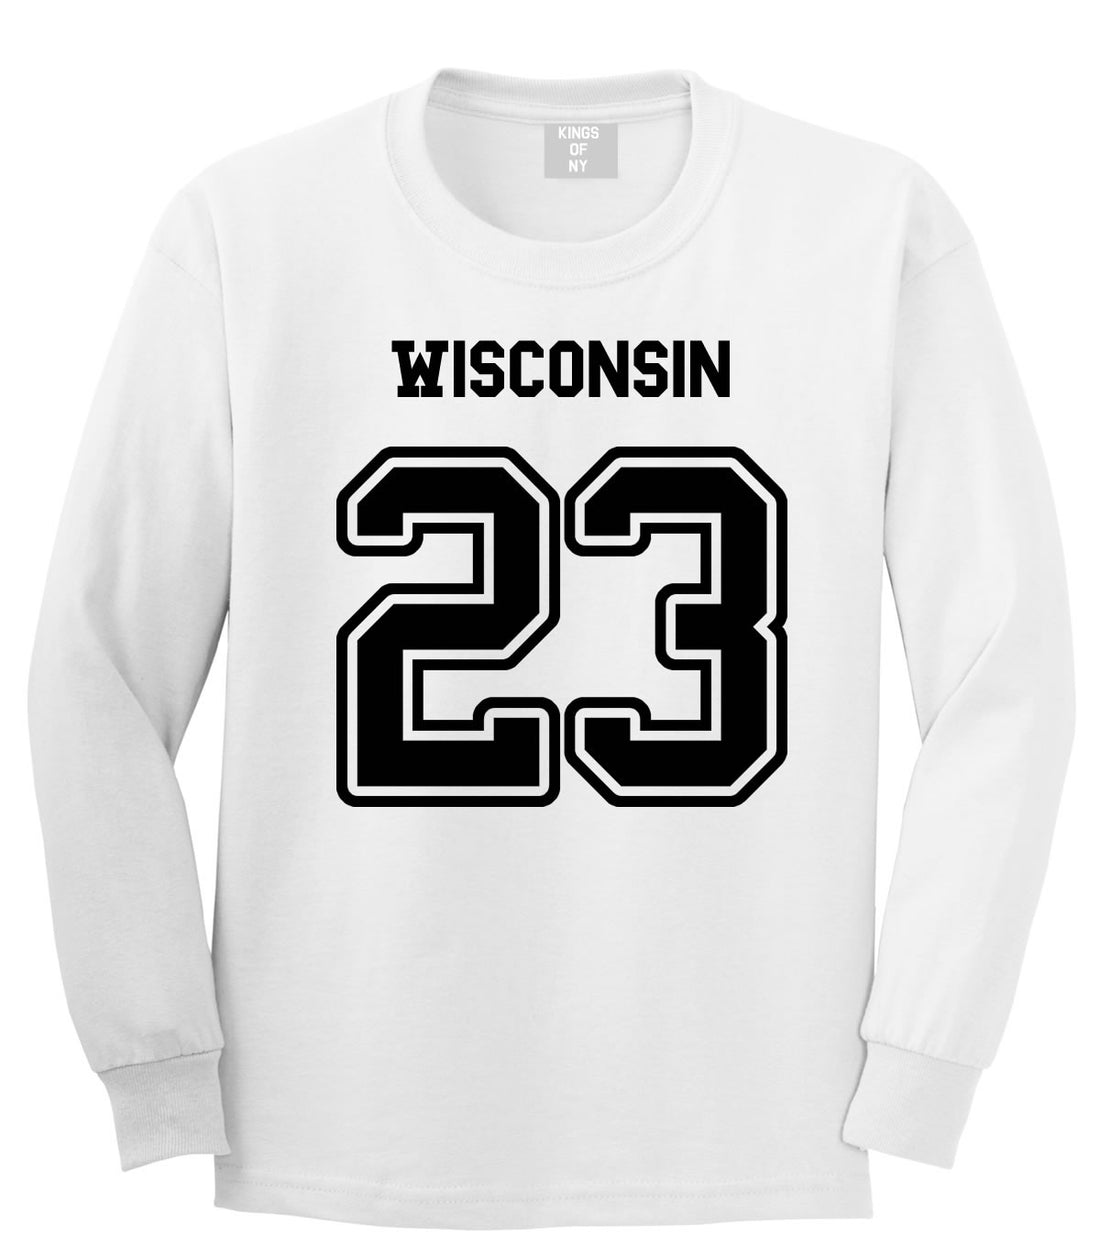 Sport Style Wisconsin 23 Team State Jersey Long Sleeve T-Shirt By Kings Of NY